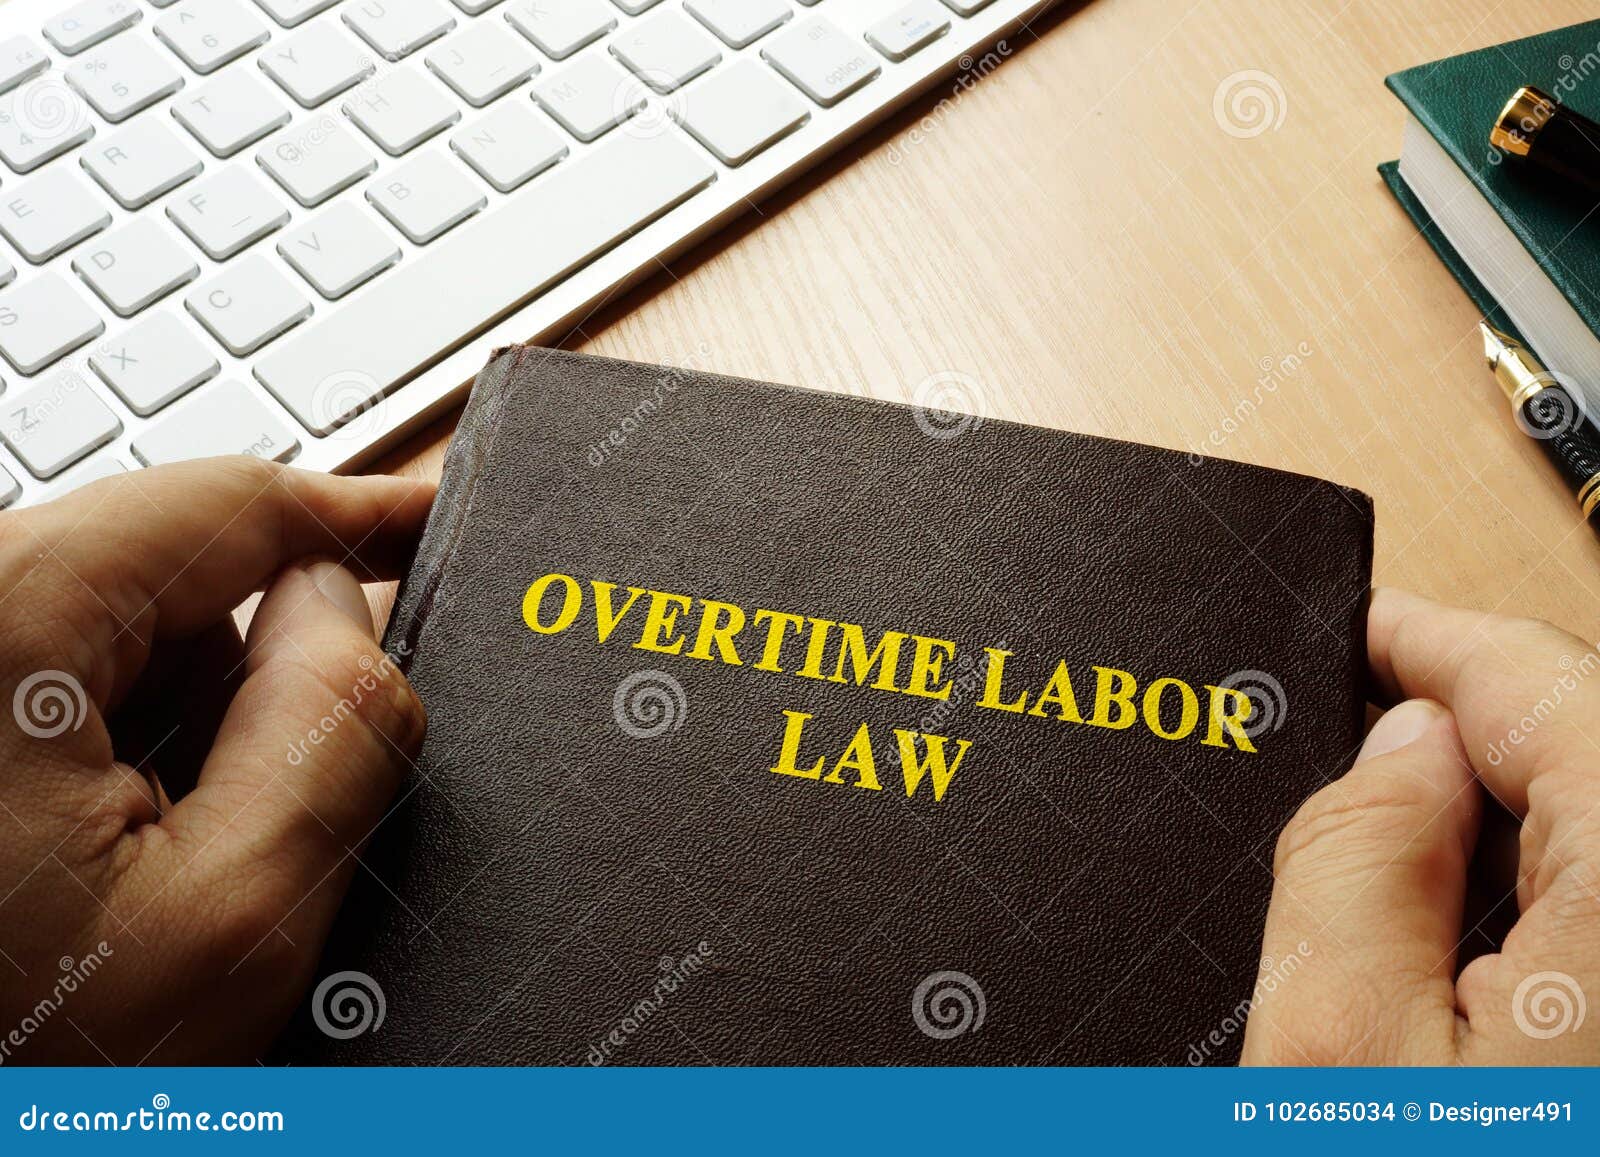 overtime labor law.